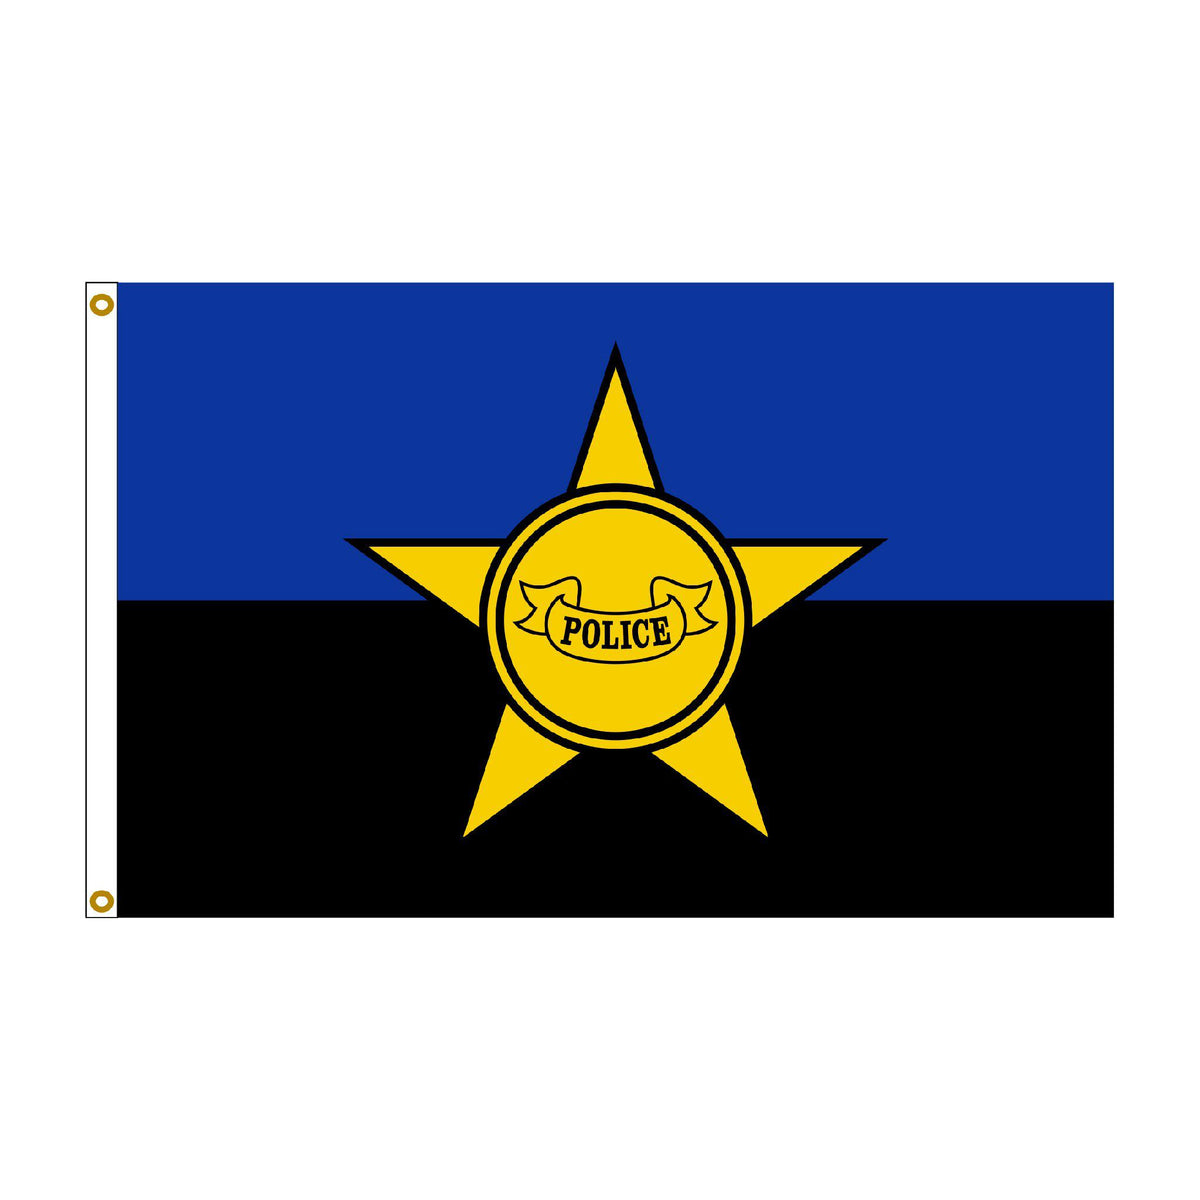 Police Remembrance flag for outdoor use